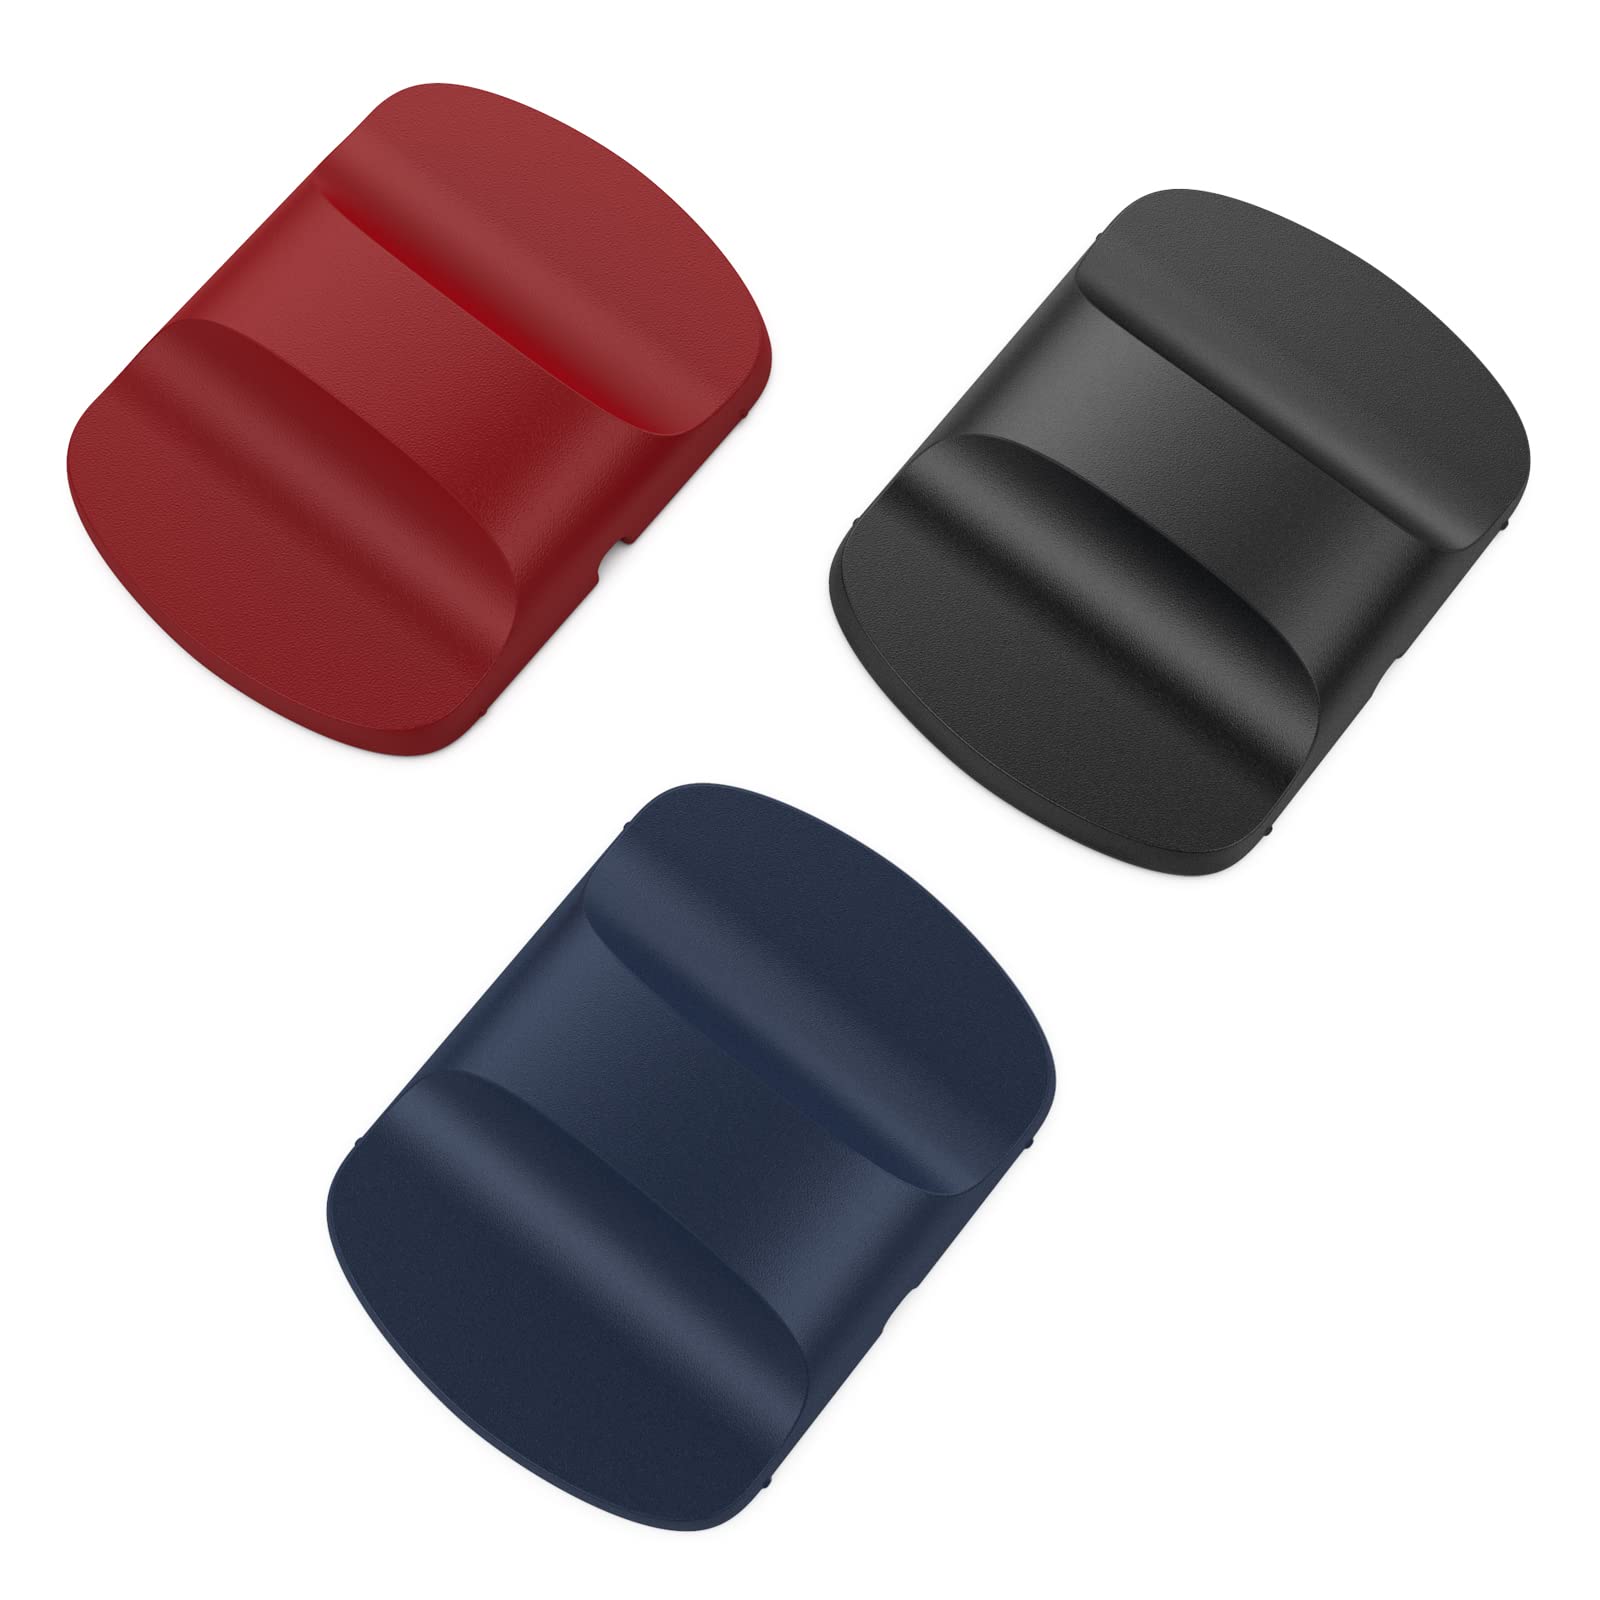 YOUCOX Magnetic Slider Block Replacement Compatible with YETI Magnetic Lid  10oz 14oz 16oz 20oz 26oz 30oz (Navy Blue Black Red)